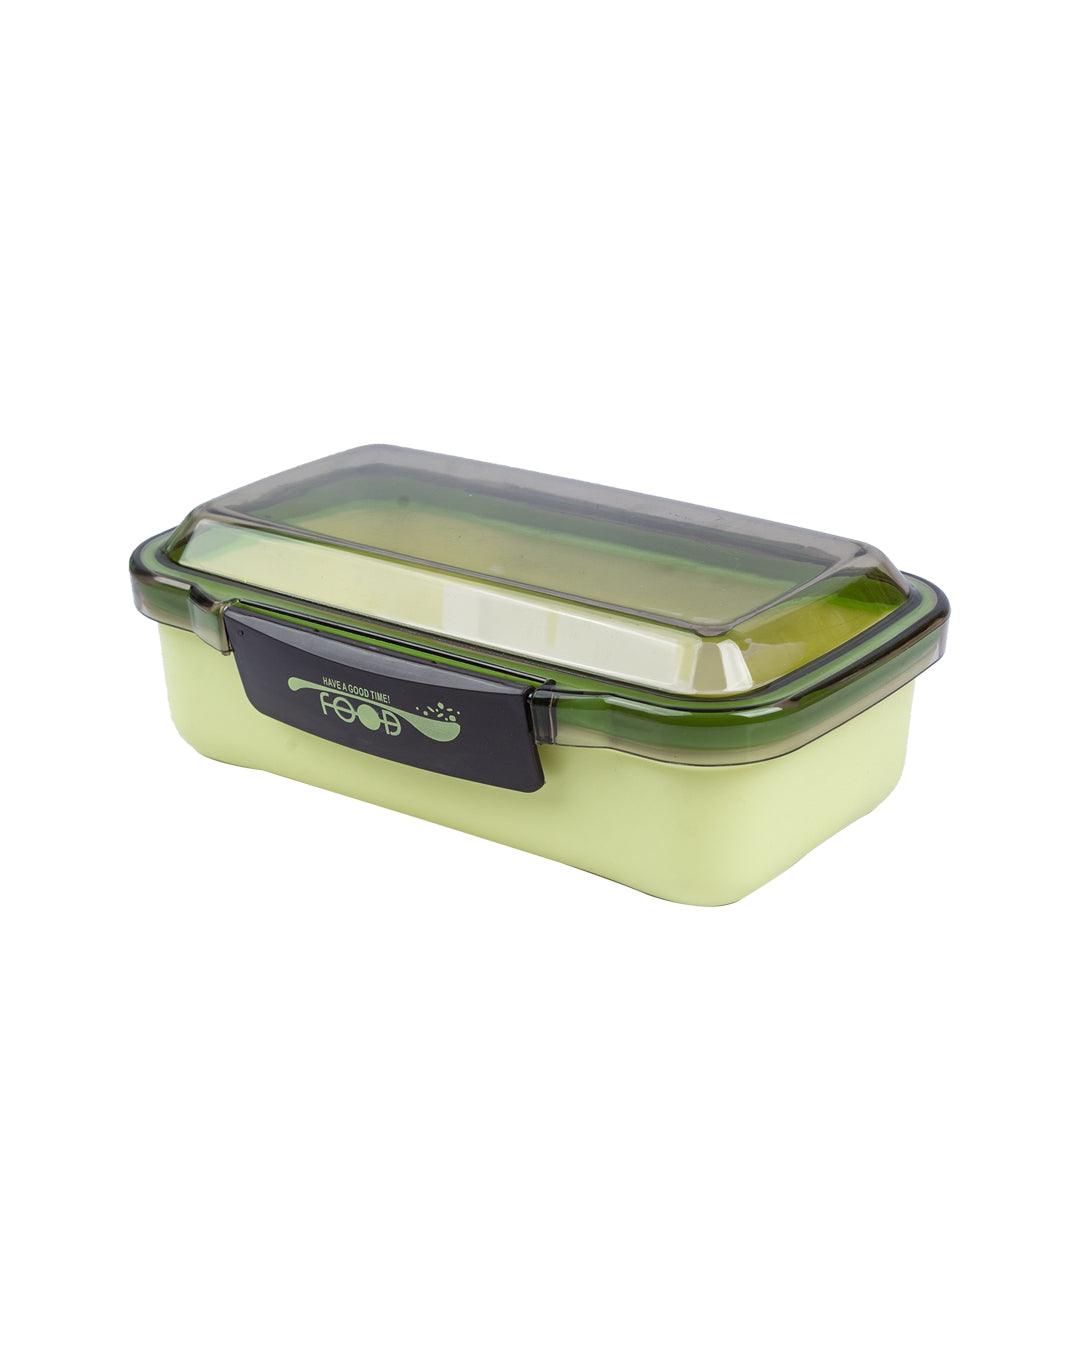 Lunch Box with Lid, Spoon & Fork, Green, Plastic - MARKET 99